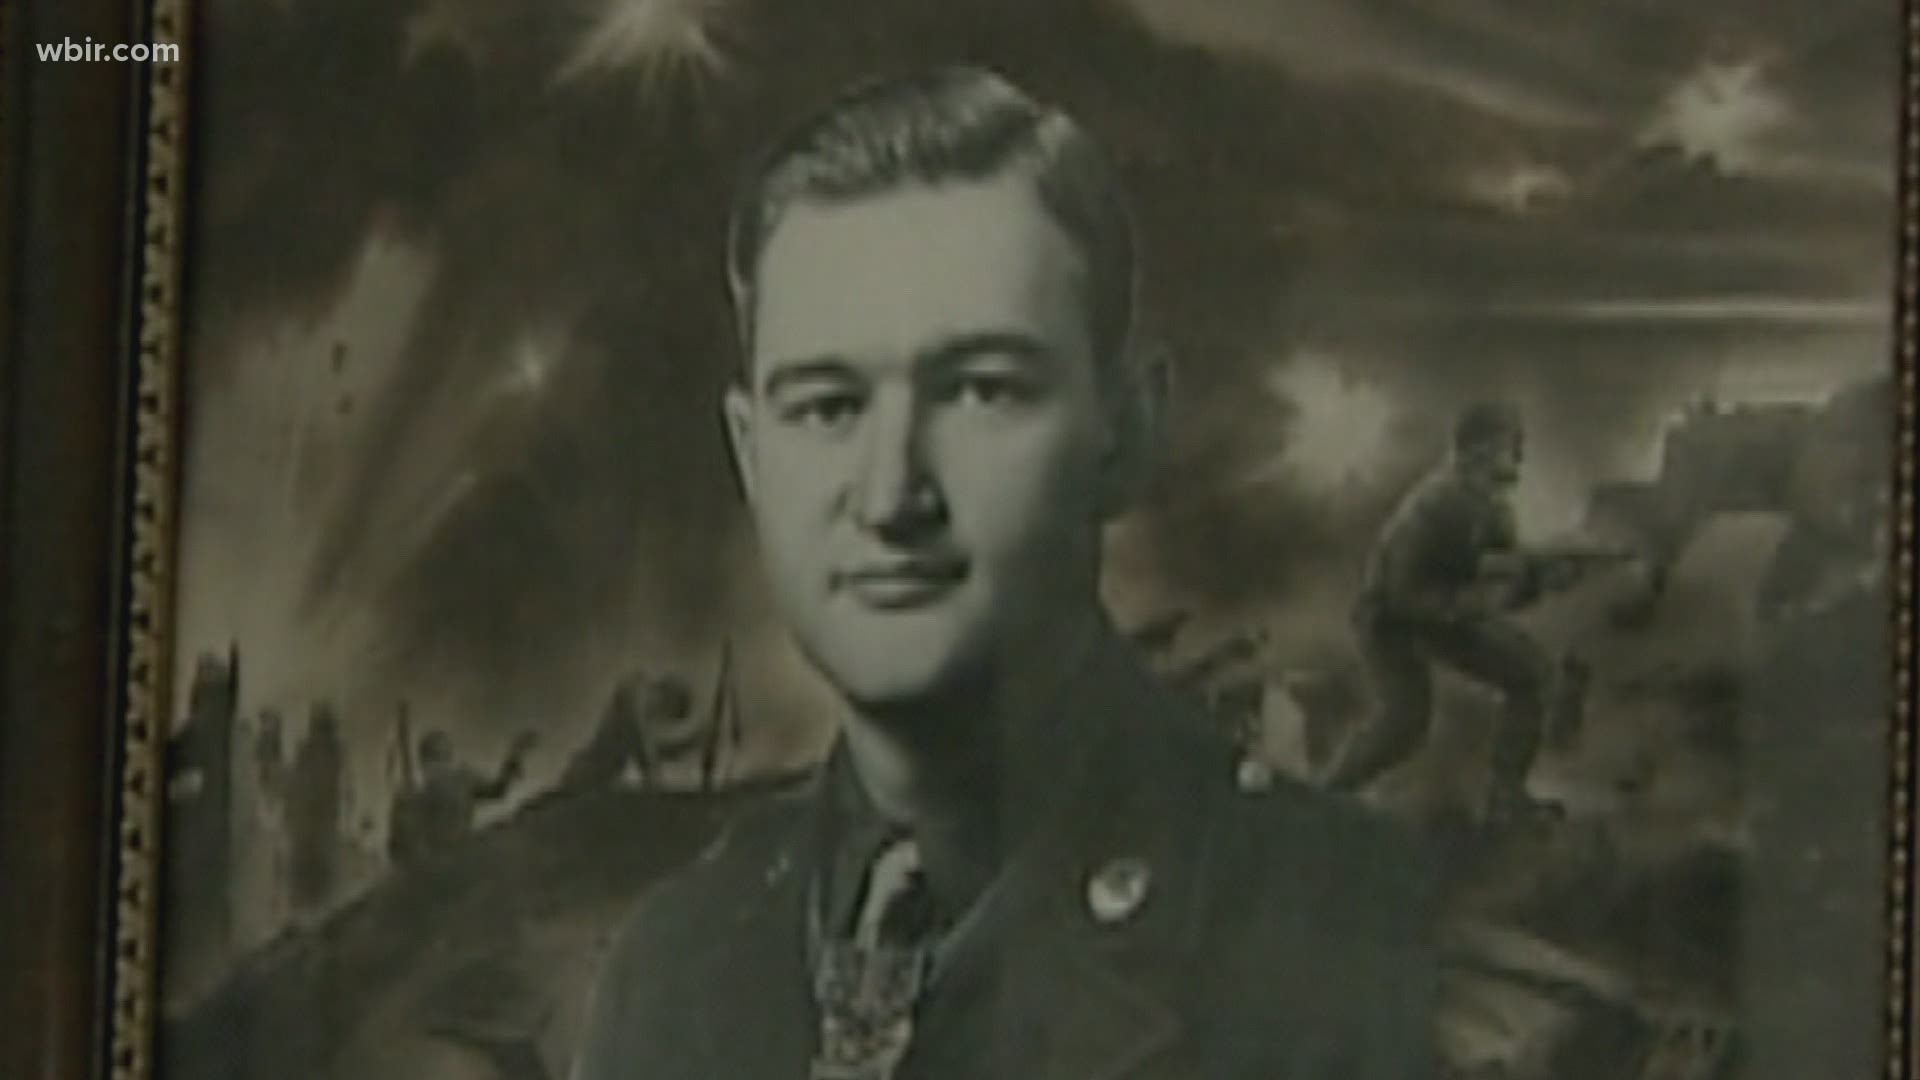 Charles Coolidge, a Medal of Honor recipient from World War II, has died at age 99.